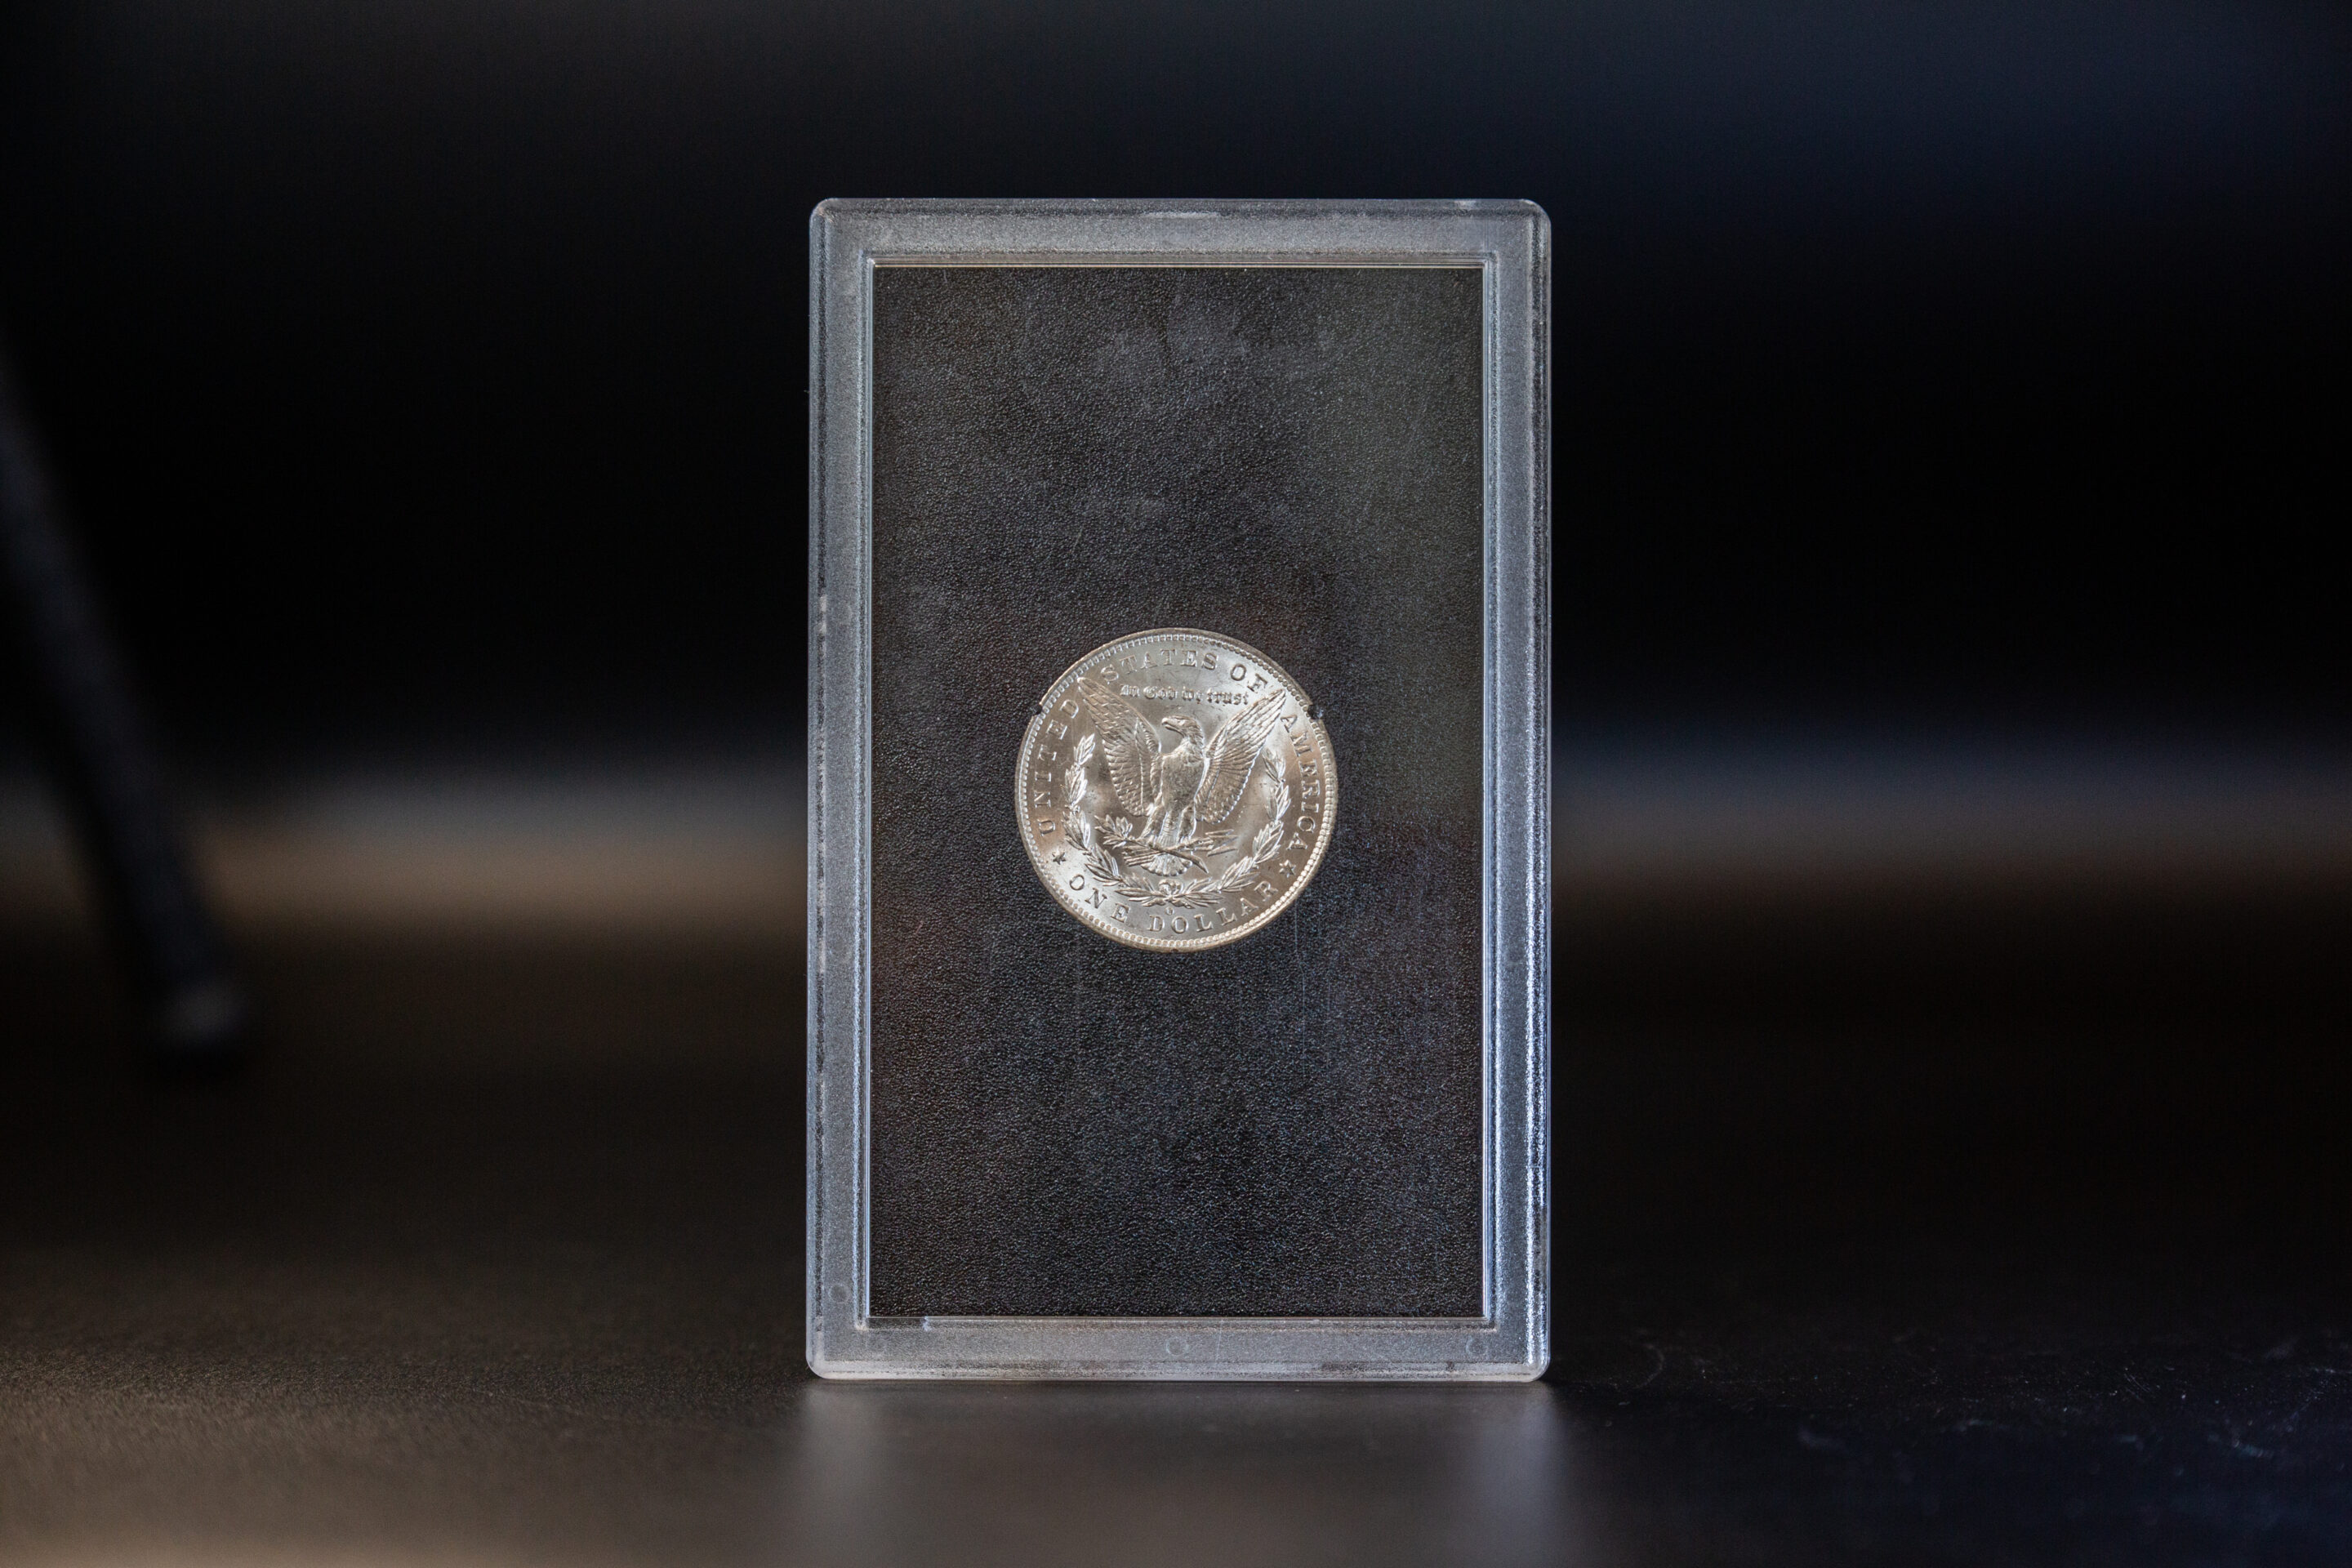 A silver coin packaged in a clear plastic case.